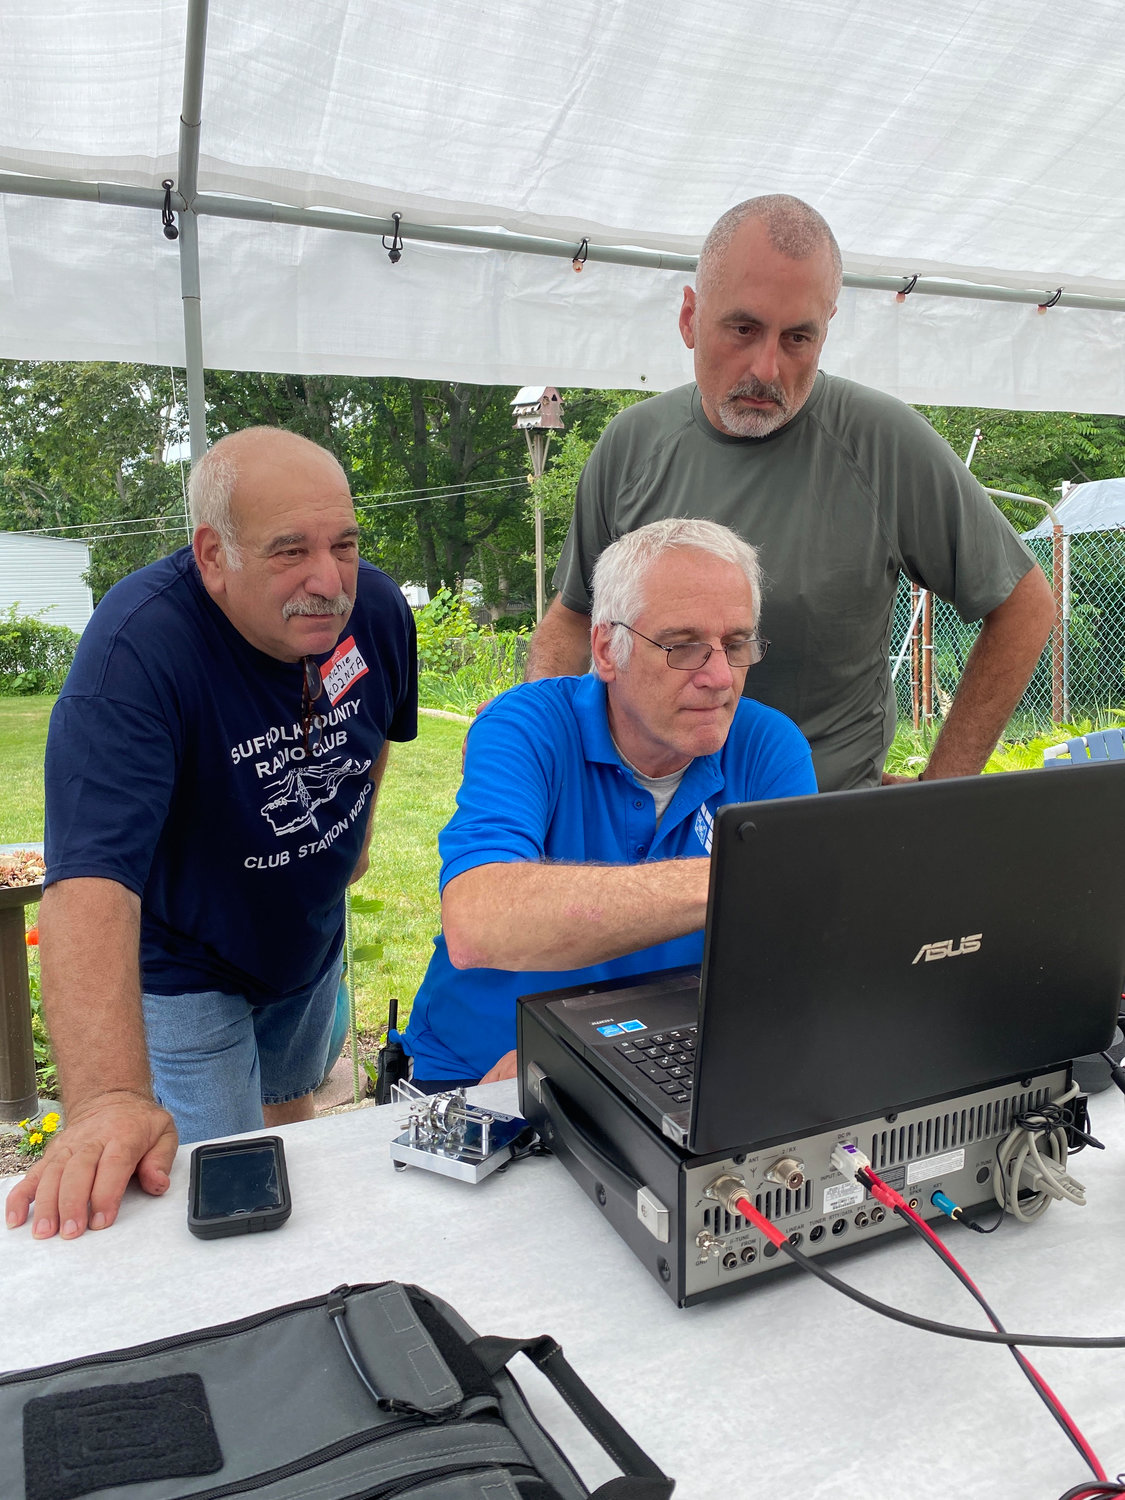 During a recent Amateur Radio Field Day in Shirley (left to right), Richie Geraci, Pres Waterman and Ed Wilson attempt to communicate with other radio clubs using Morse code. Waterman can communicate at 30 words per minute, considered “fast Morse.”